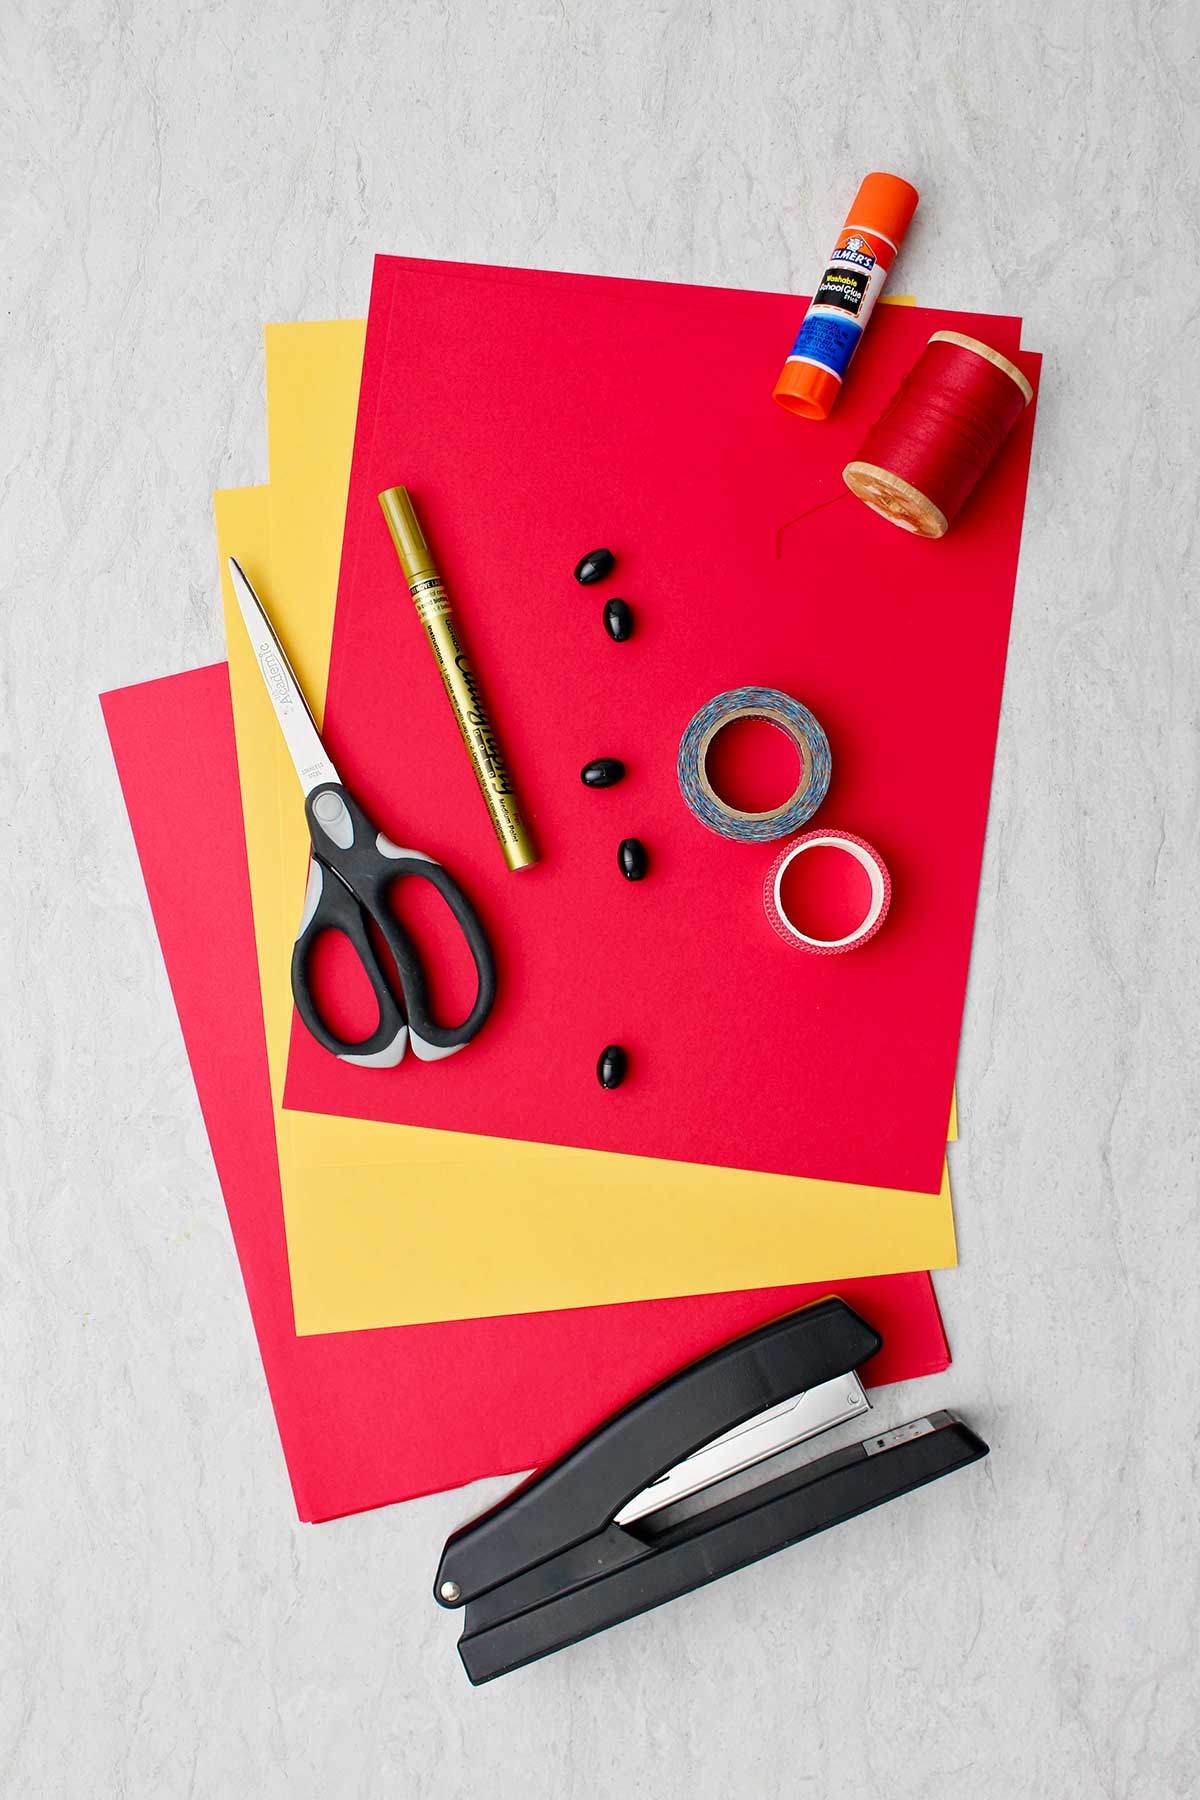 Supplies to make Simple Chinese Lanterns. Red and yellow paper, scissors, gold pen, tape, string, glue and stapler.